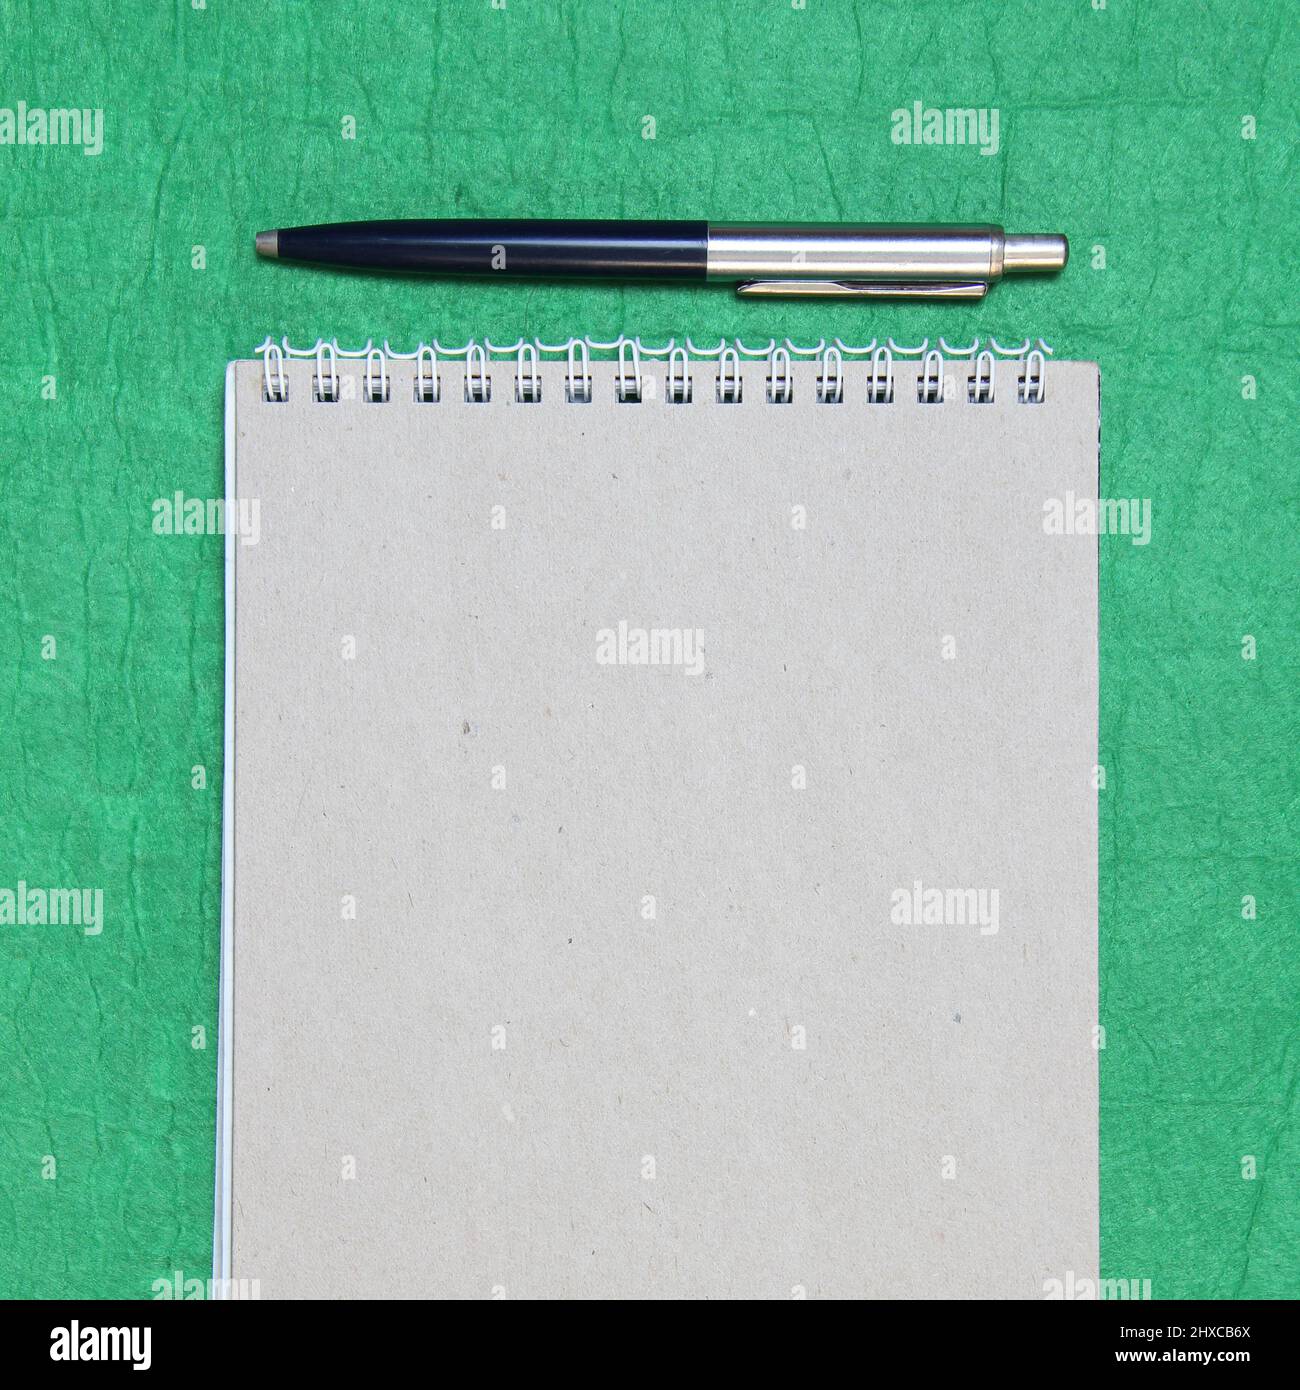 White and gray notepad sheet with spiral with pen against the background of green fabric. Concept of analysis, study, attentive work. Stock photo with empty place for your text and design. Square image shape. Stock Photo